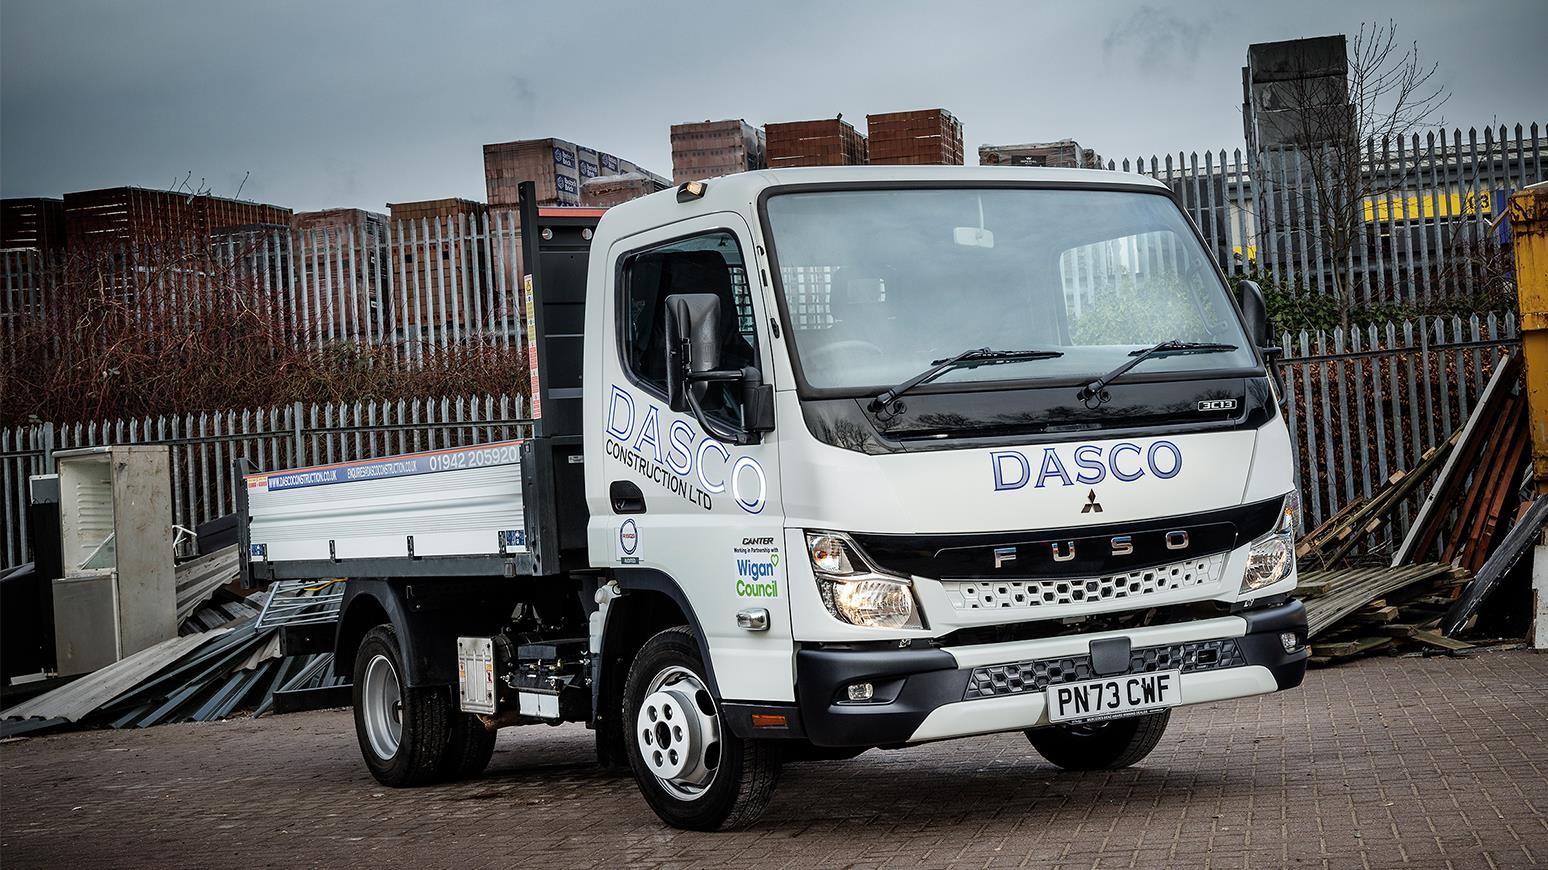 Fuso Canter’s Quality Brings Dasco Construction Back For More